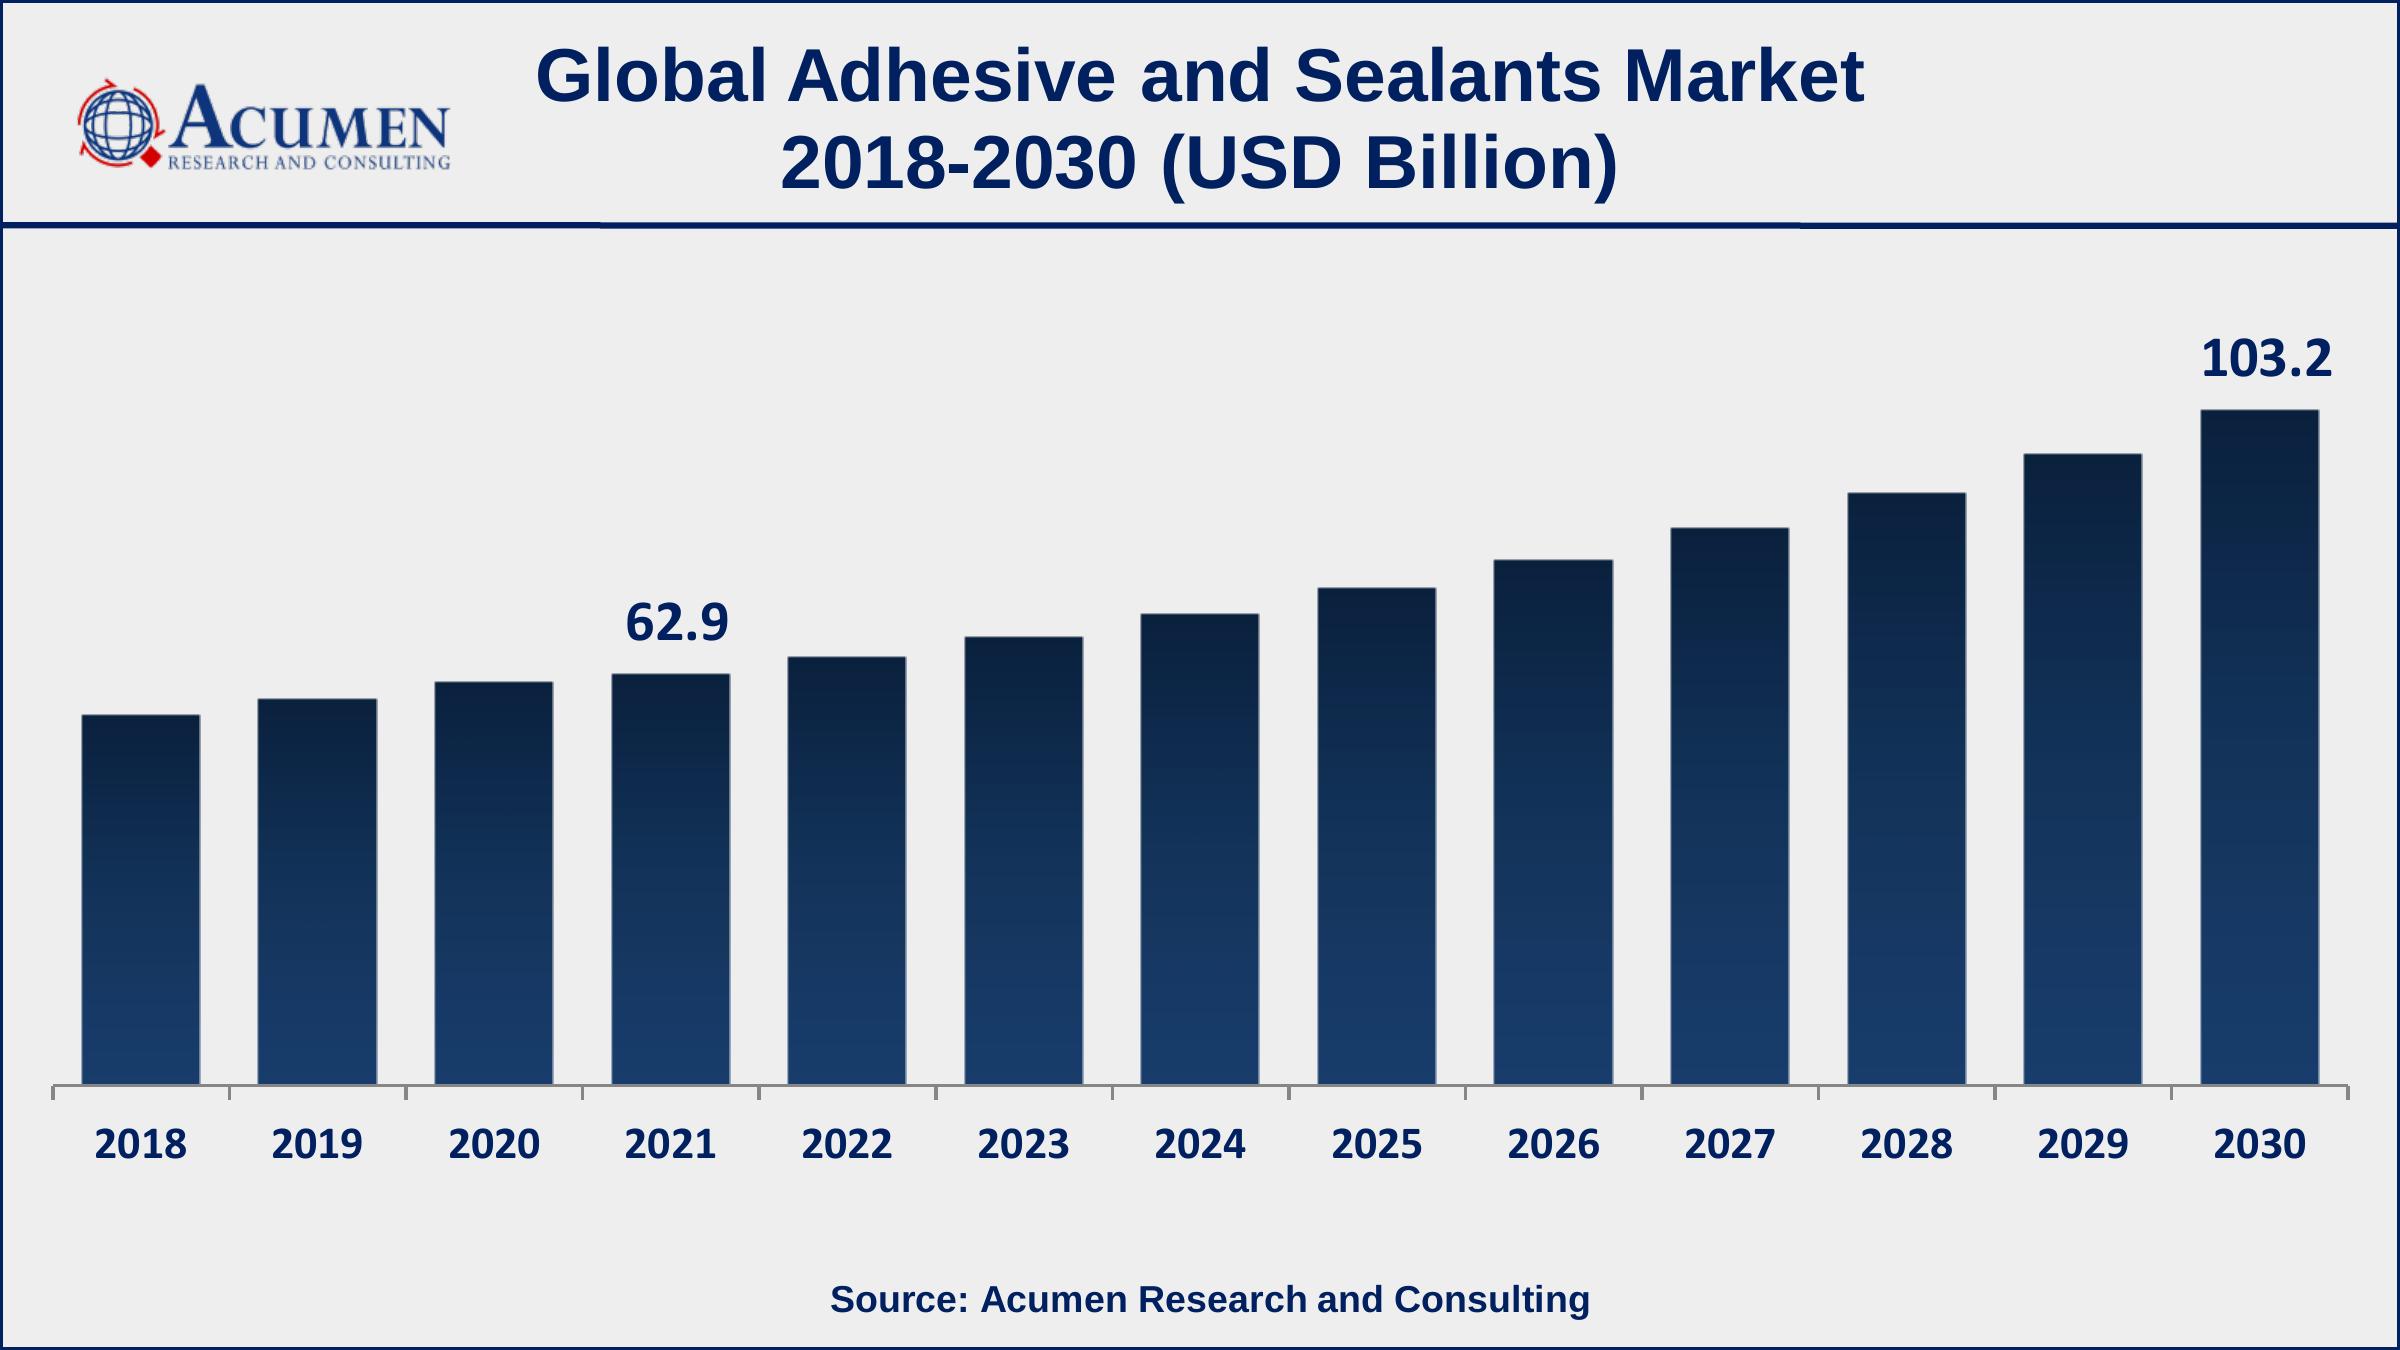 Asia-Pacific region led with more than 35.8% adhesive and sealants market share in 2021